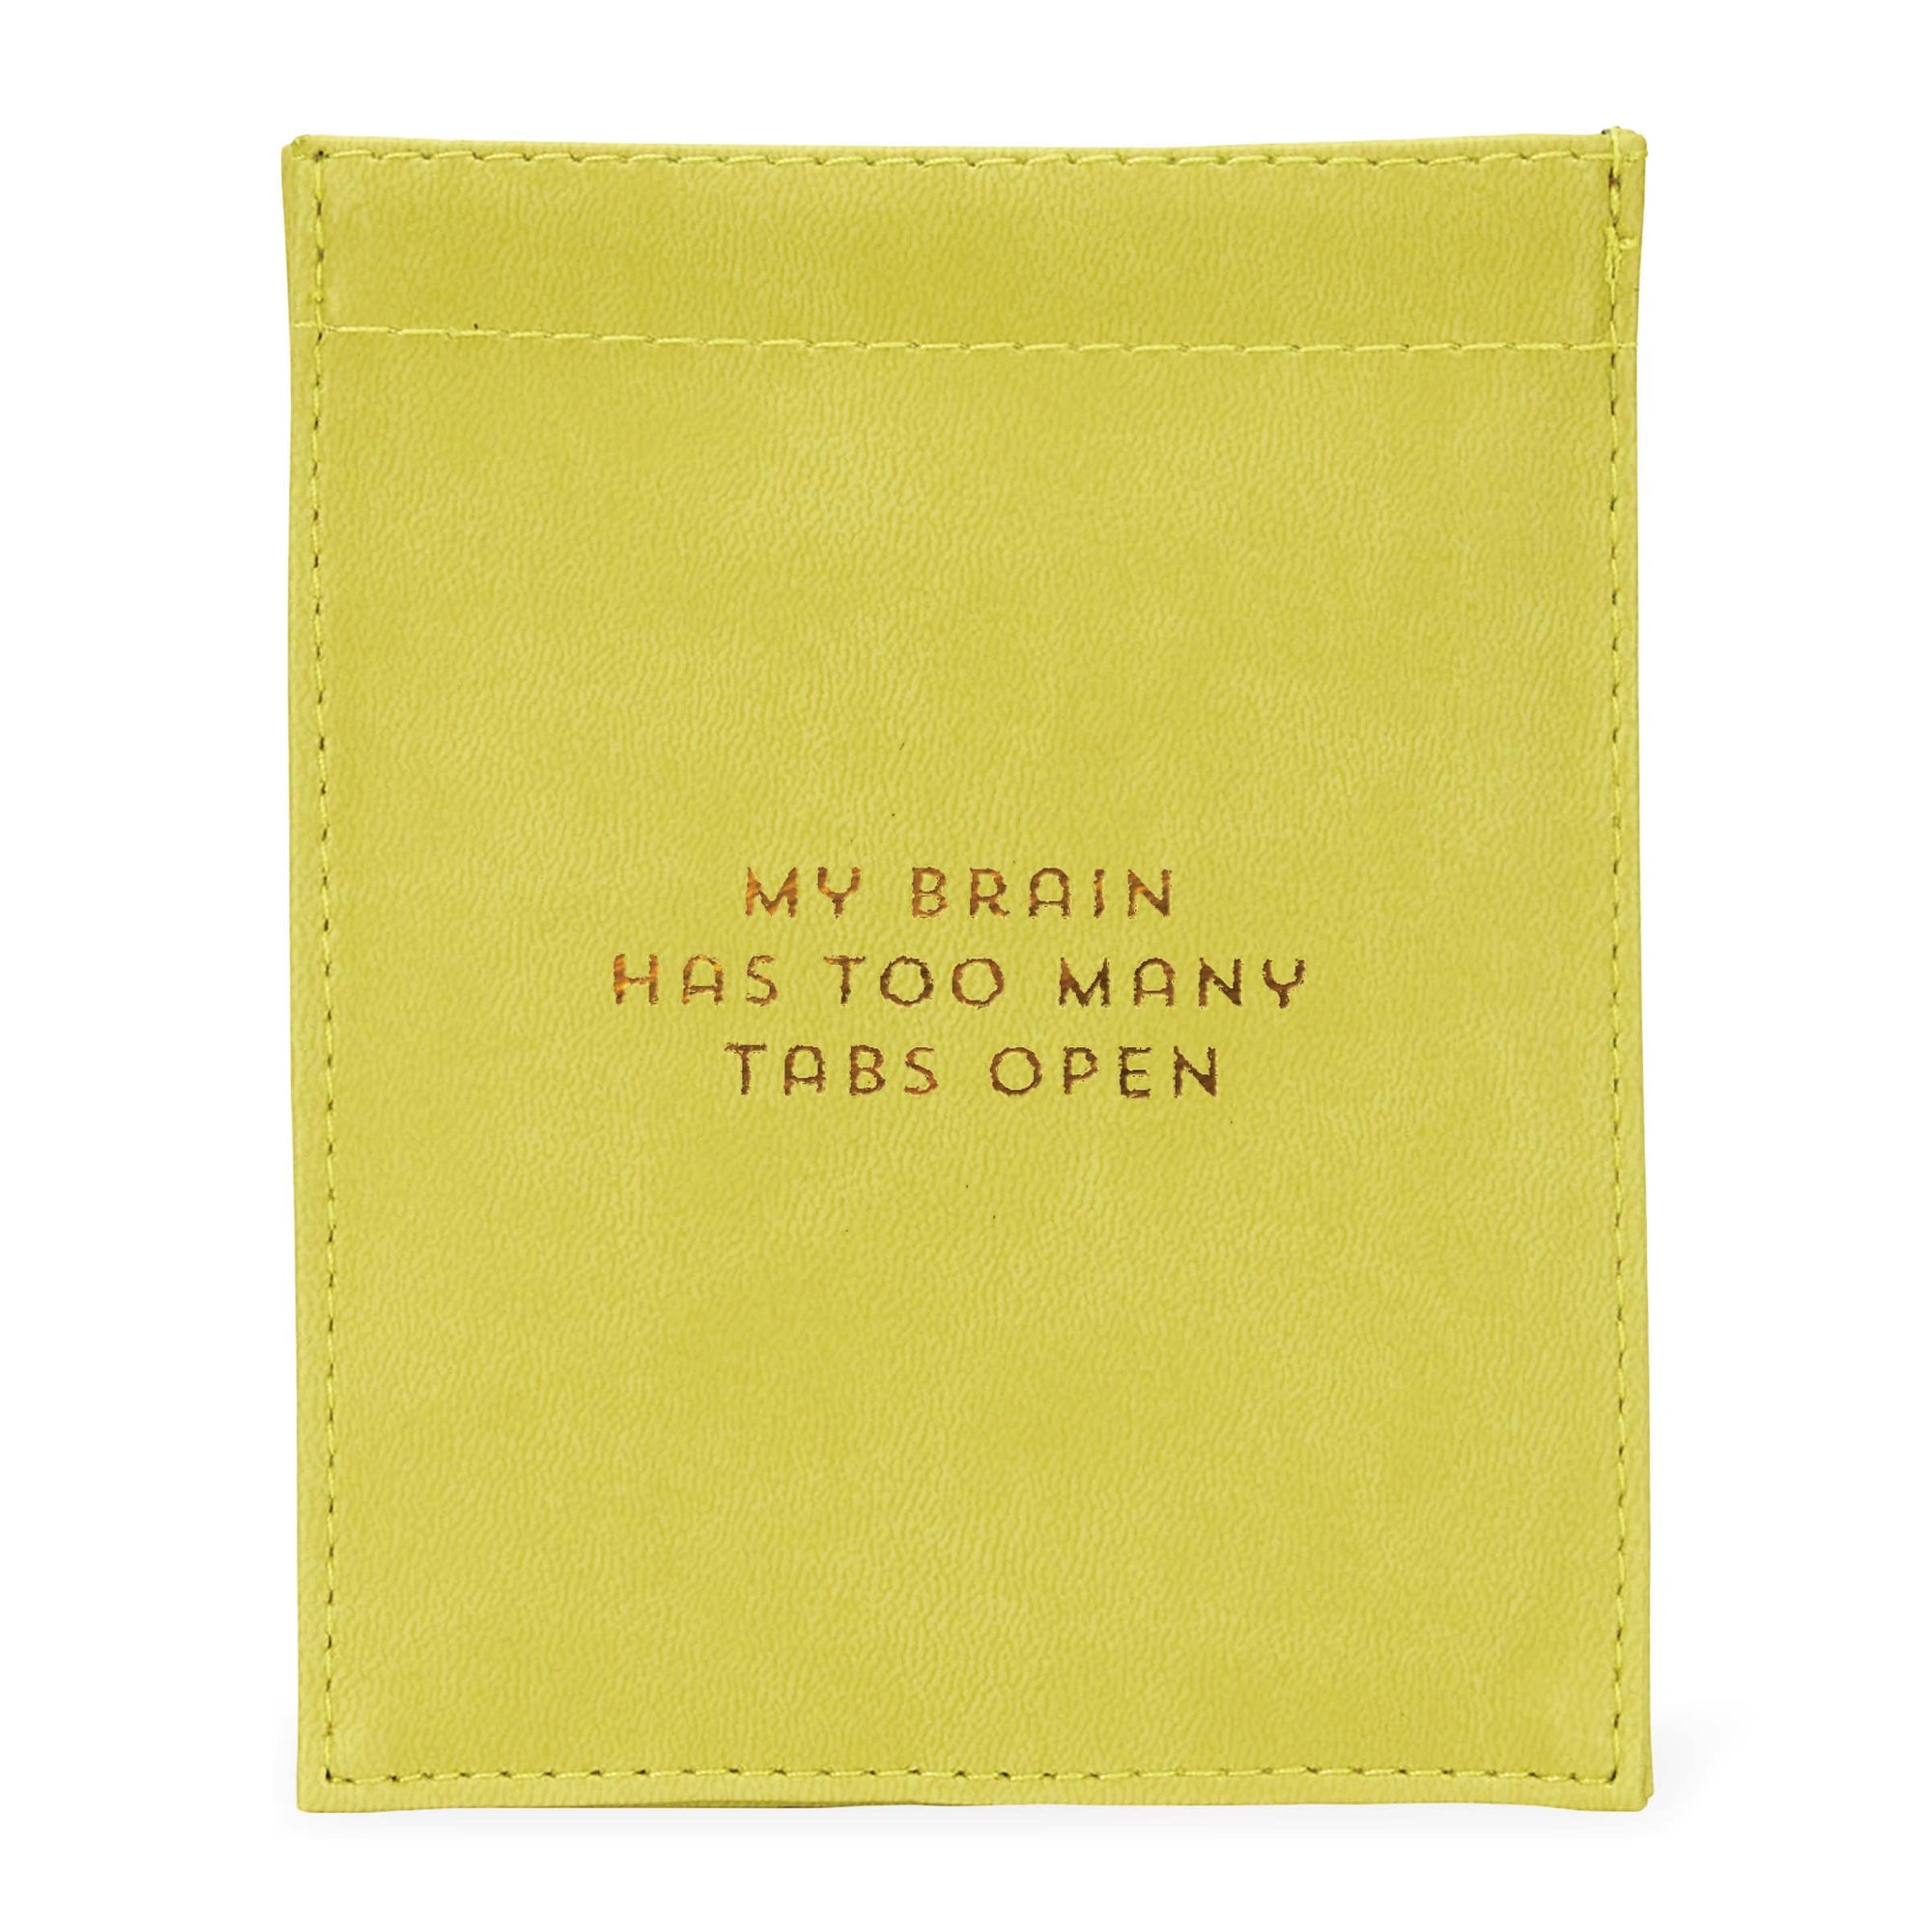  "My brain has too many tabs open" Leatherette Cord Pouch, CRG-CR Gibson, Putti Fine Furnishings